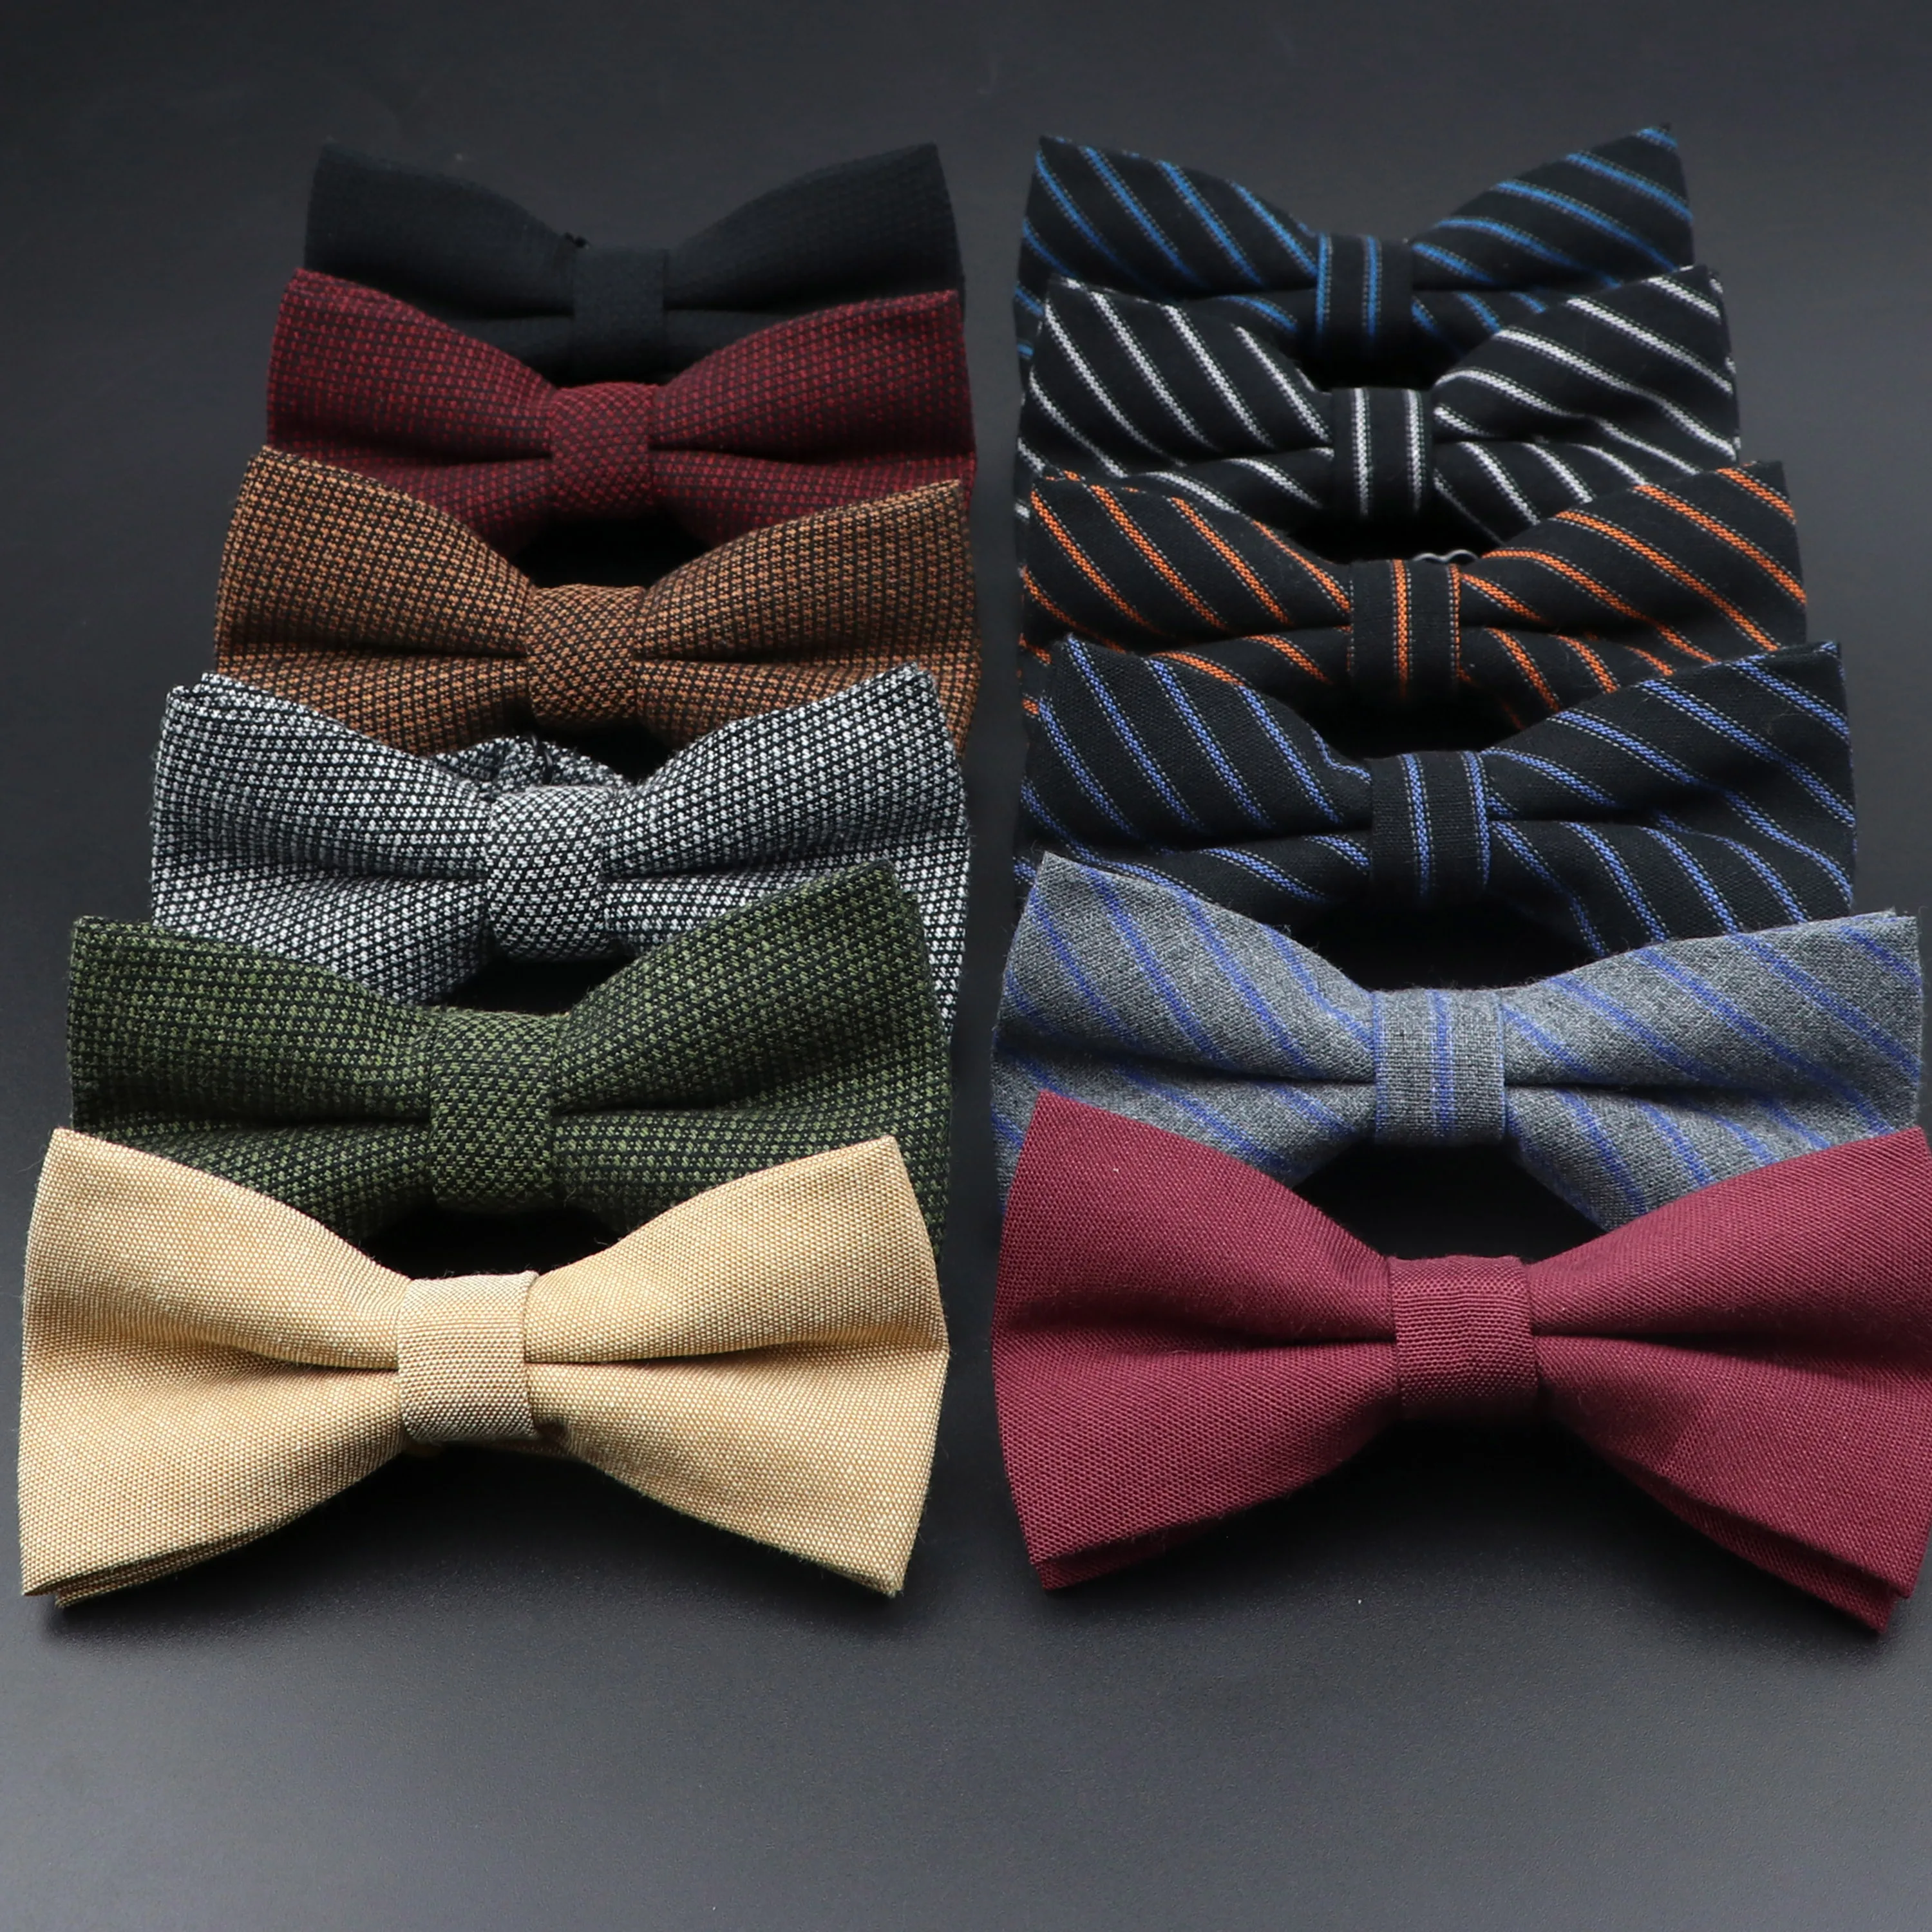 Men Striped Cotton Bowtie Knot Cravat Black Grey Blue Tuxedo Wedding Butterfly Red Groom Party Casual Bow Tie Gift Accessory